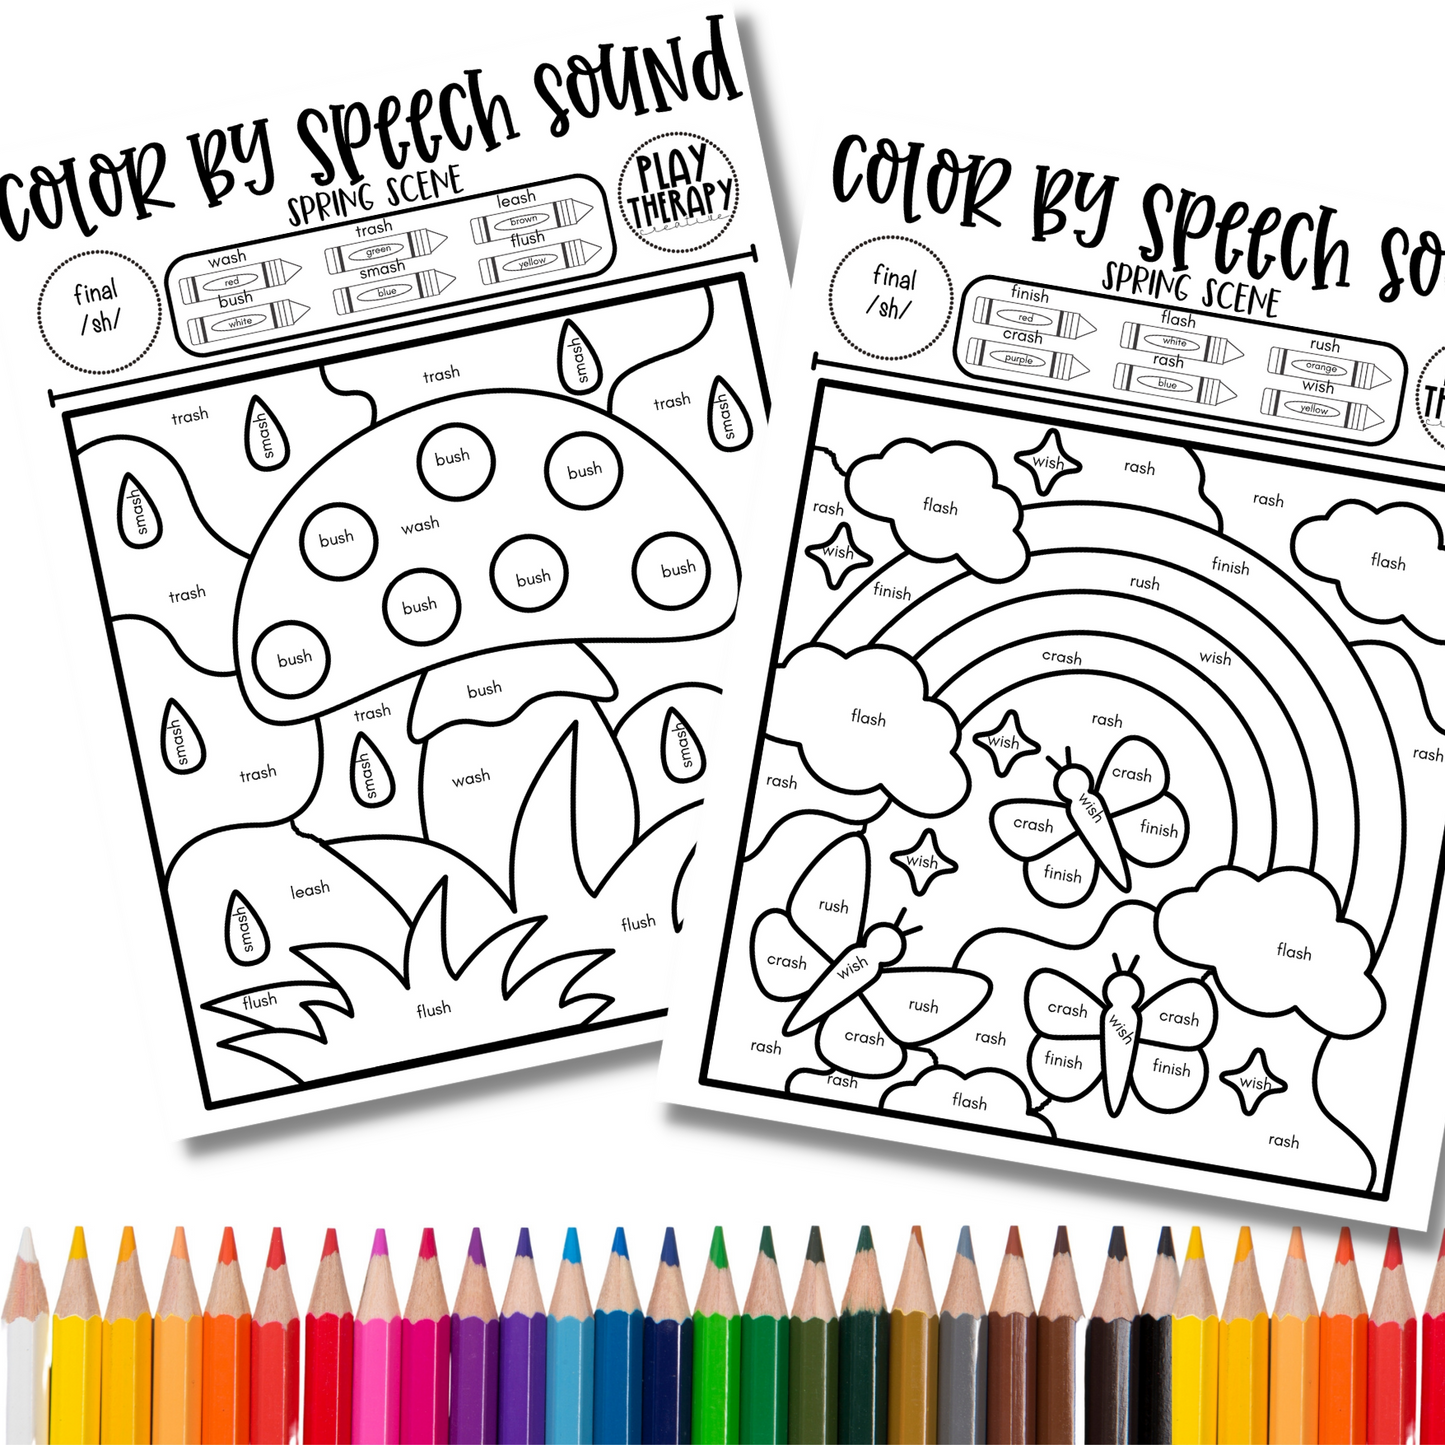 /sh/ Sound Spring Themed Color-by-Speech-Sounds for Speech Therapy